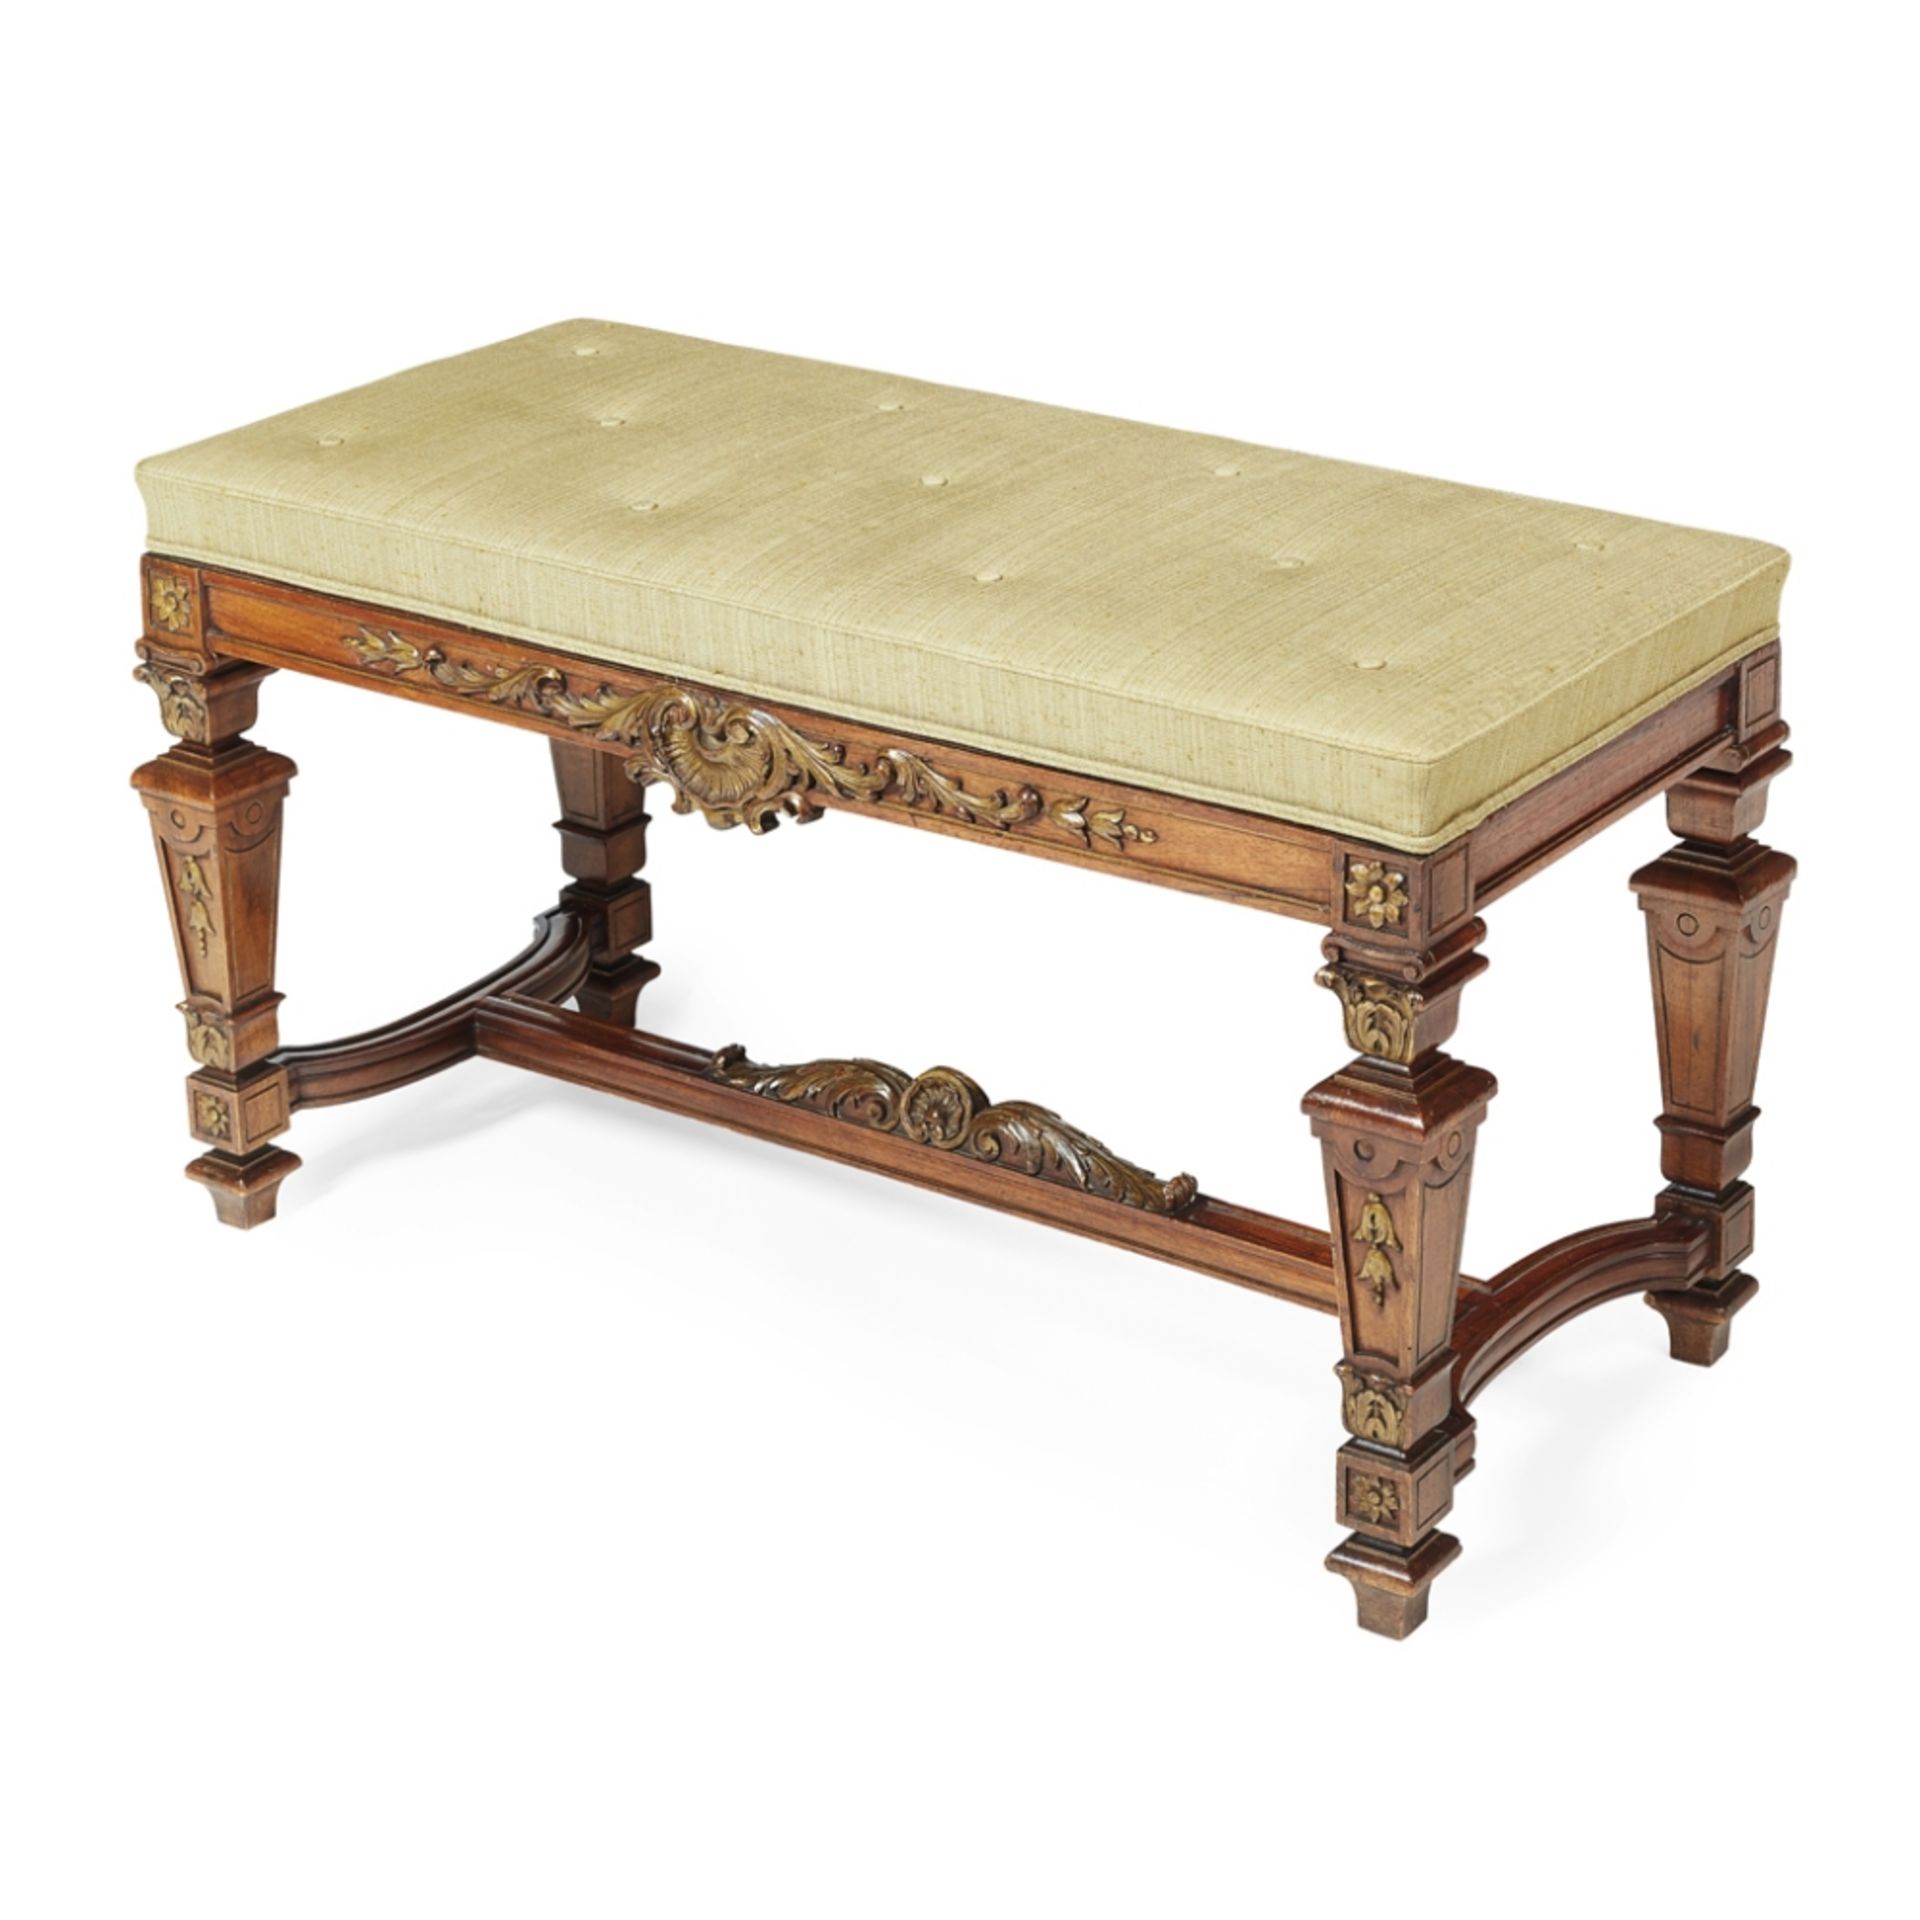 VICTORIAN CARVED WALNUT AND GILT FRAMED LONG STOOL 19TH CENTURY in the French Baroque style, with